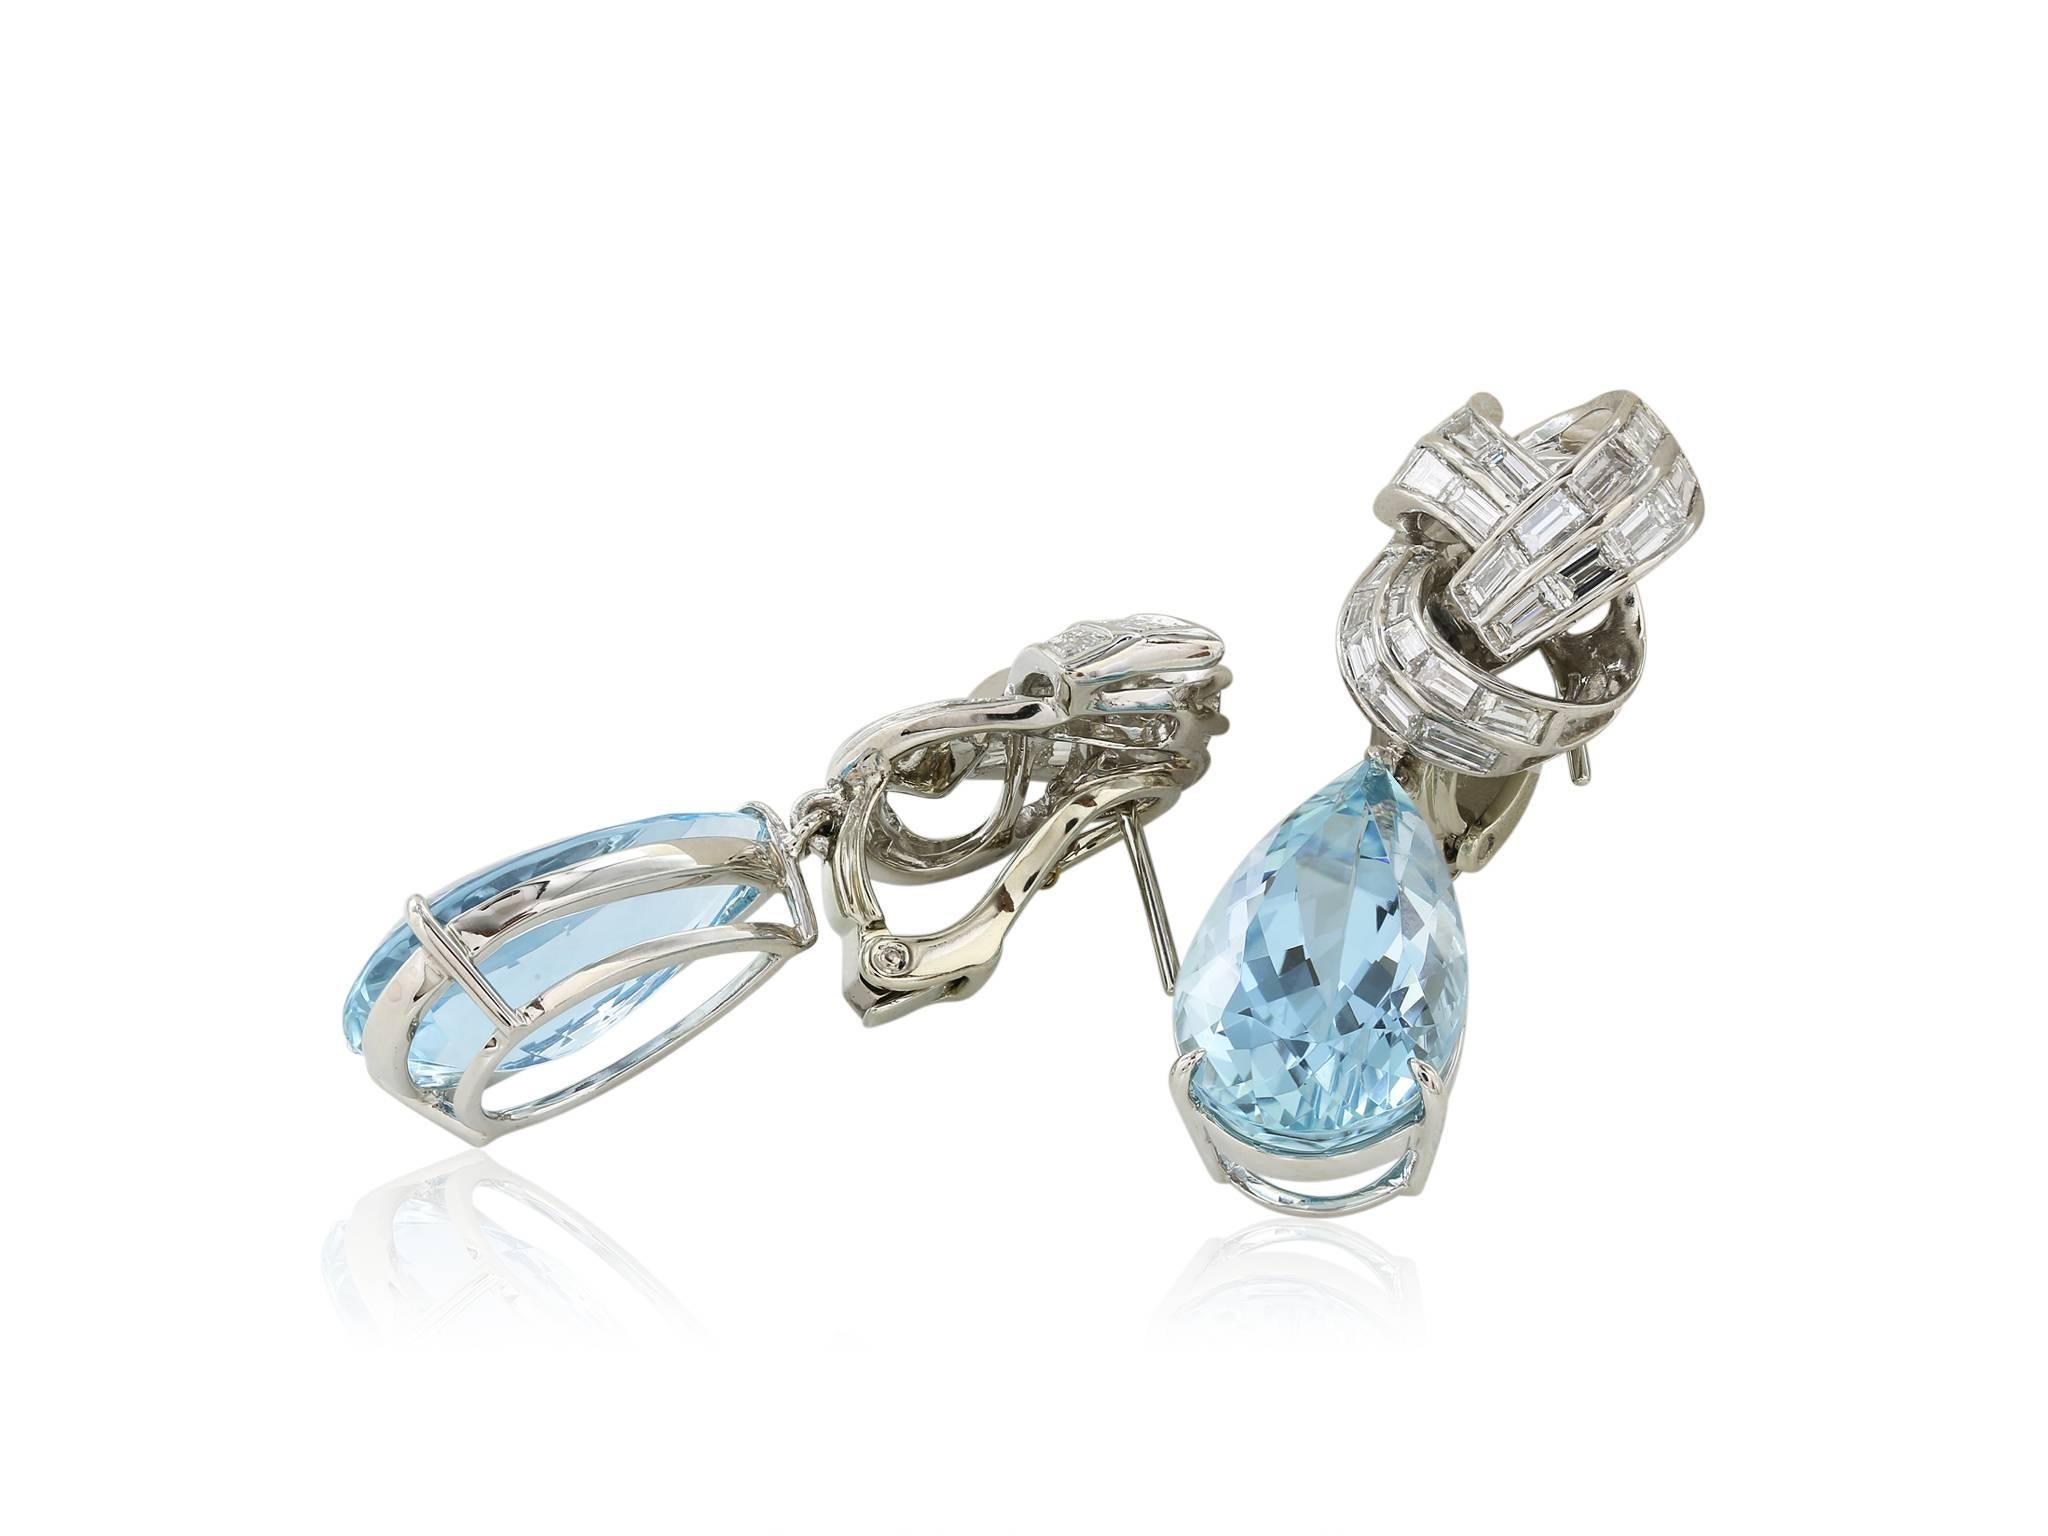 Platinum Pear shape Aquamarine and diamond drop earrings. Consisting of 2 PS Aquamarines measuring 11.50x18.00.00 MM and weighing approximately 14 carats capped by 52 Baguette diamonds having a total weight of approximately 2.75 carats